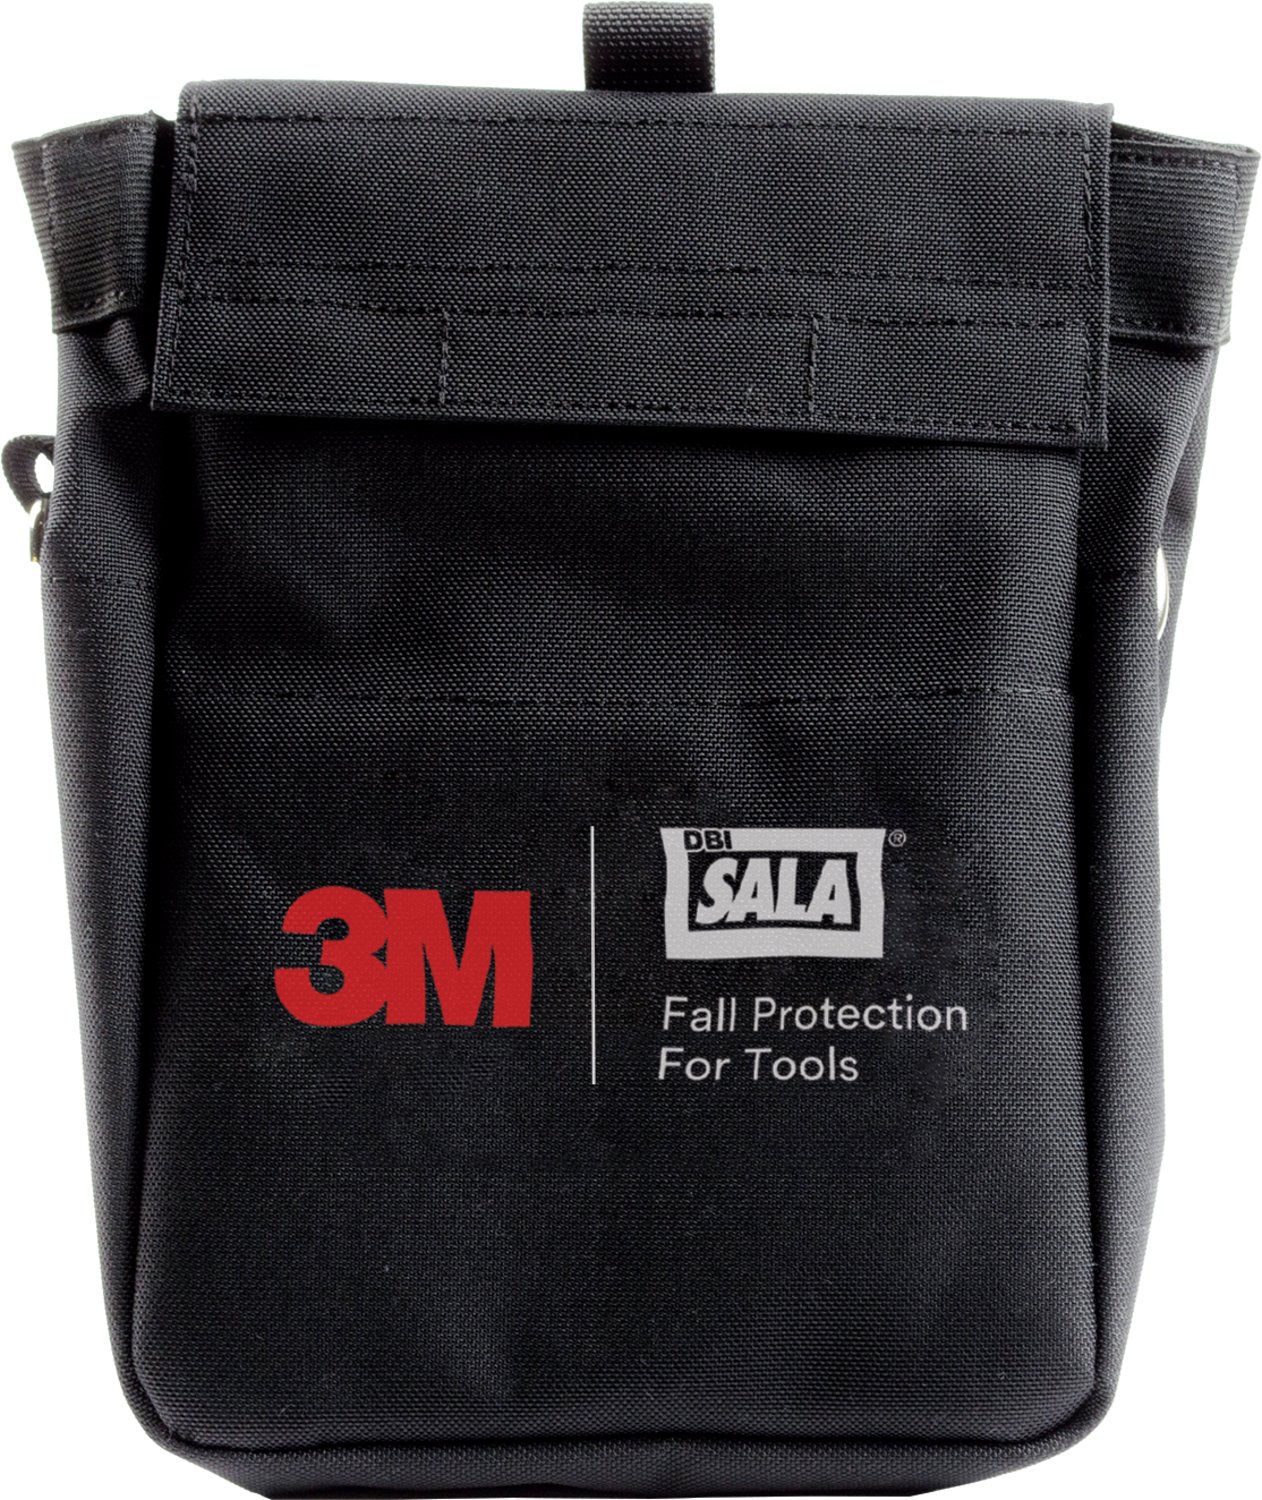 7100311719 - 3M Tool Pouch with D-ring and Triggers 1500126, Canvas, Black, 7.5 in x
11 in